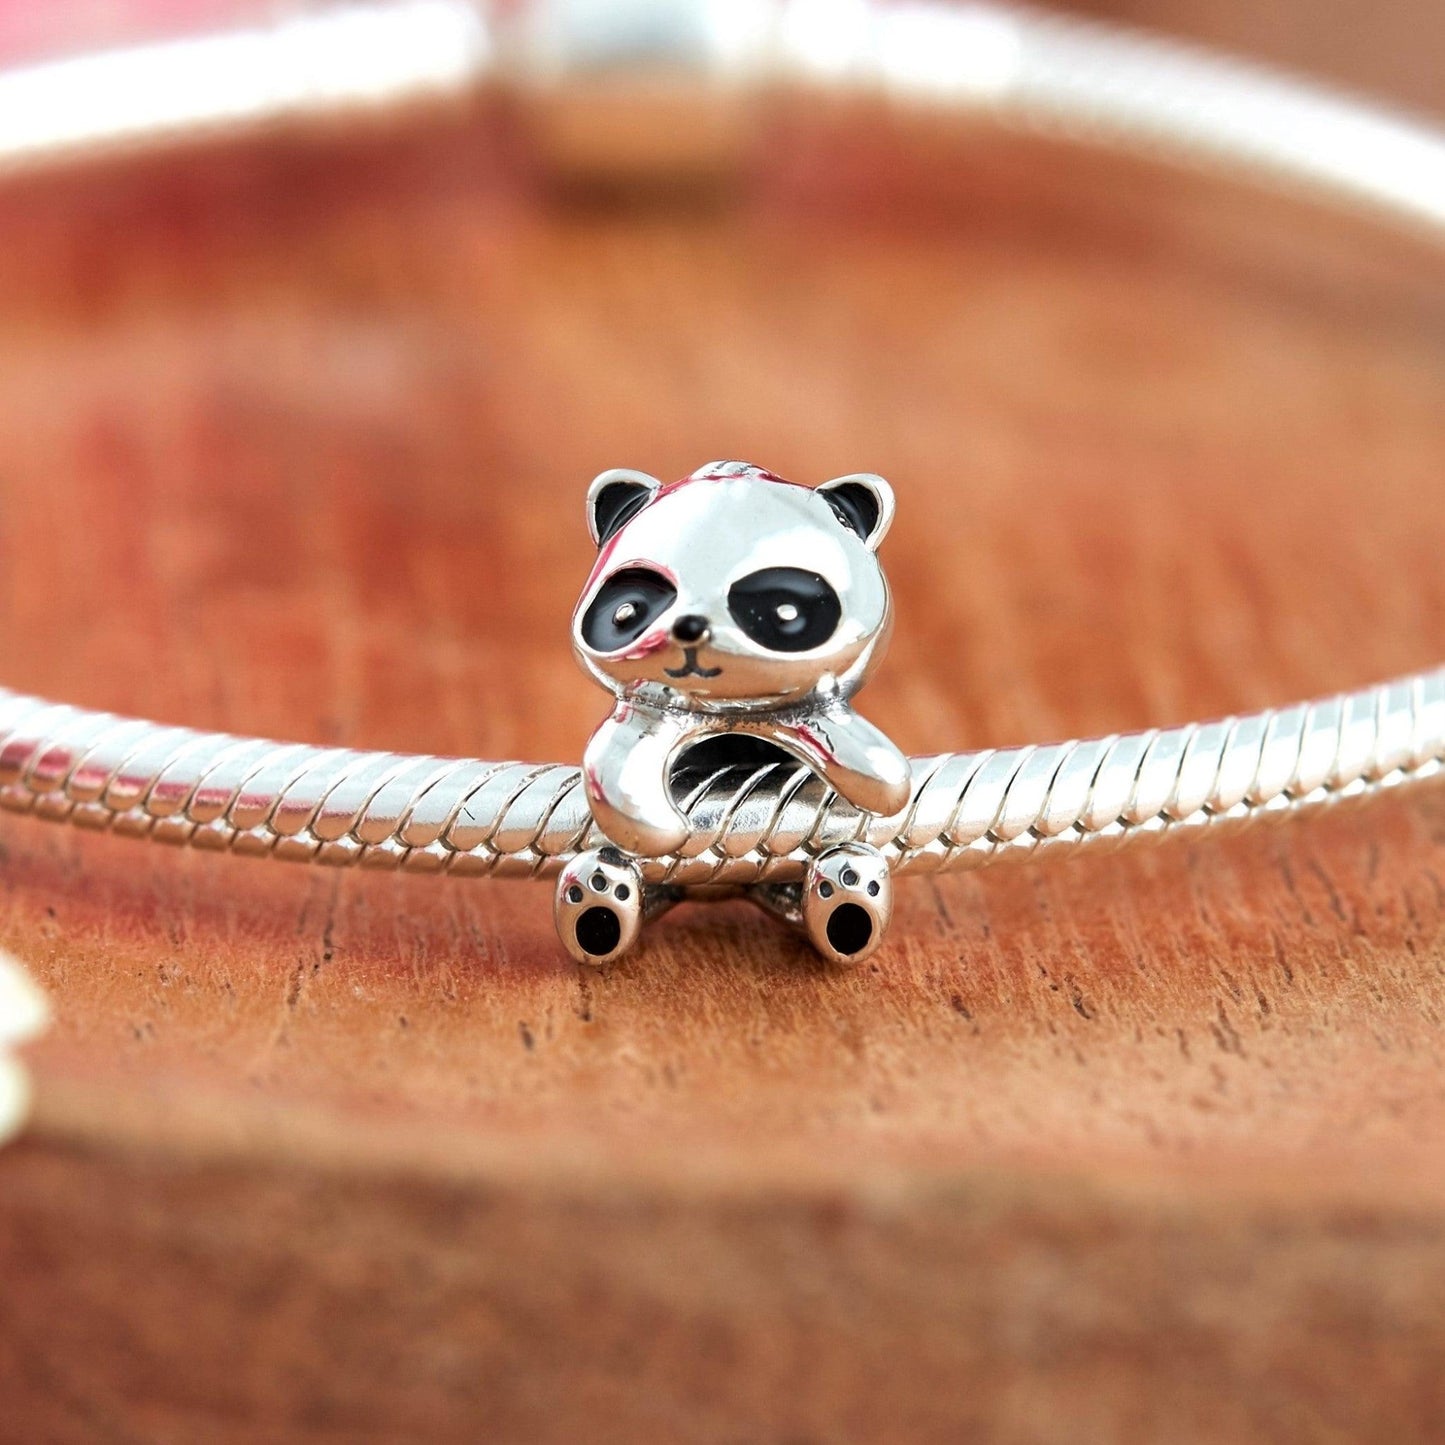 Panda Charm- Crafted in 925 Sterling Silver with beautiful detailing & black enamel finishes.